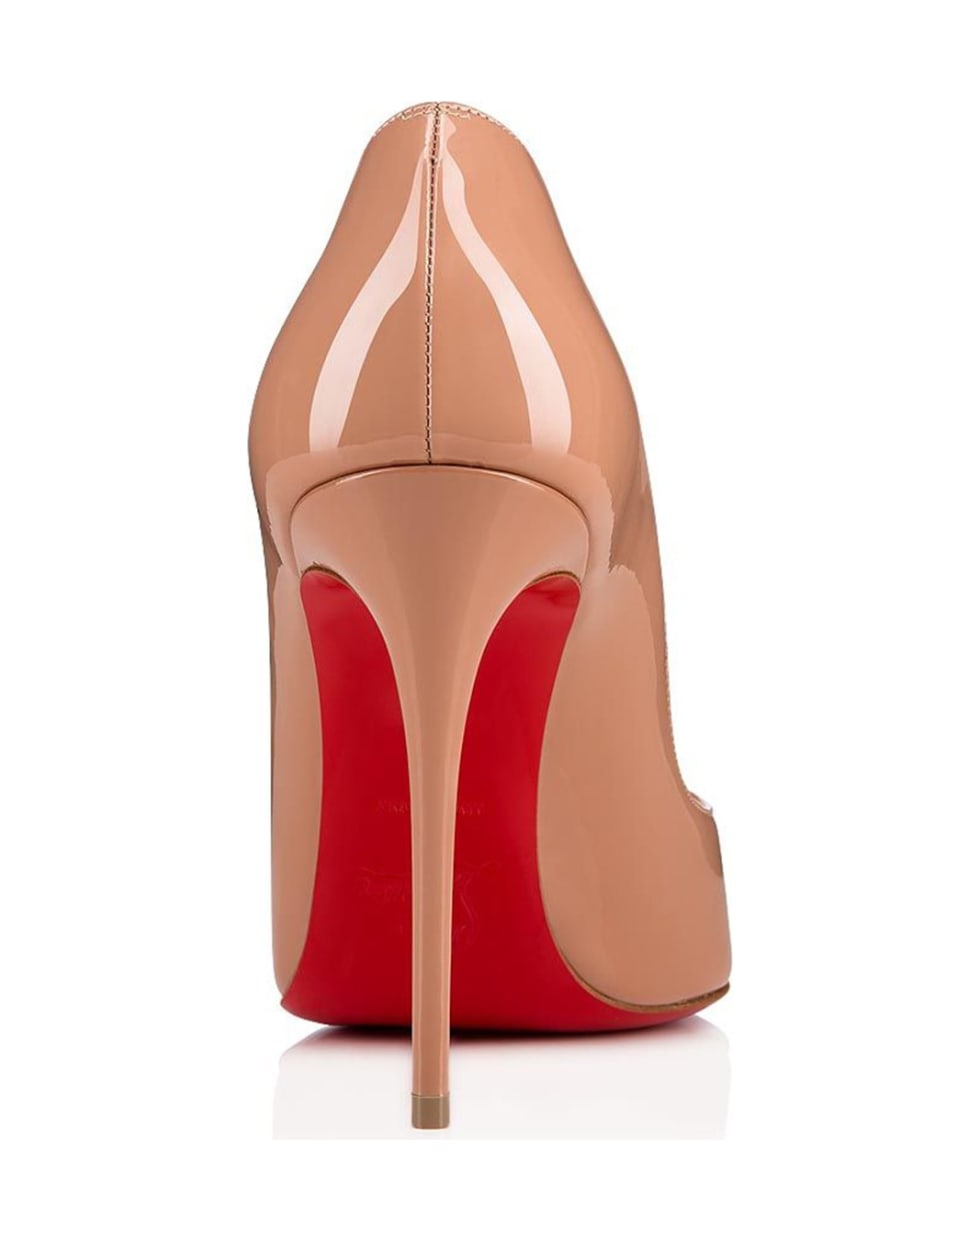 Christian Louboutin Hot Chic 100 Nude Patent Leather Pumps - NUDE